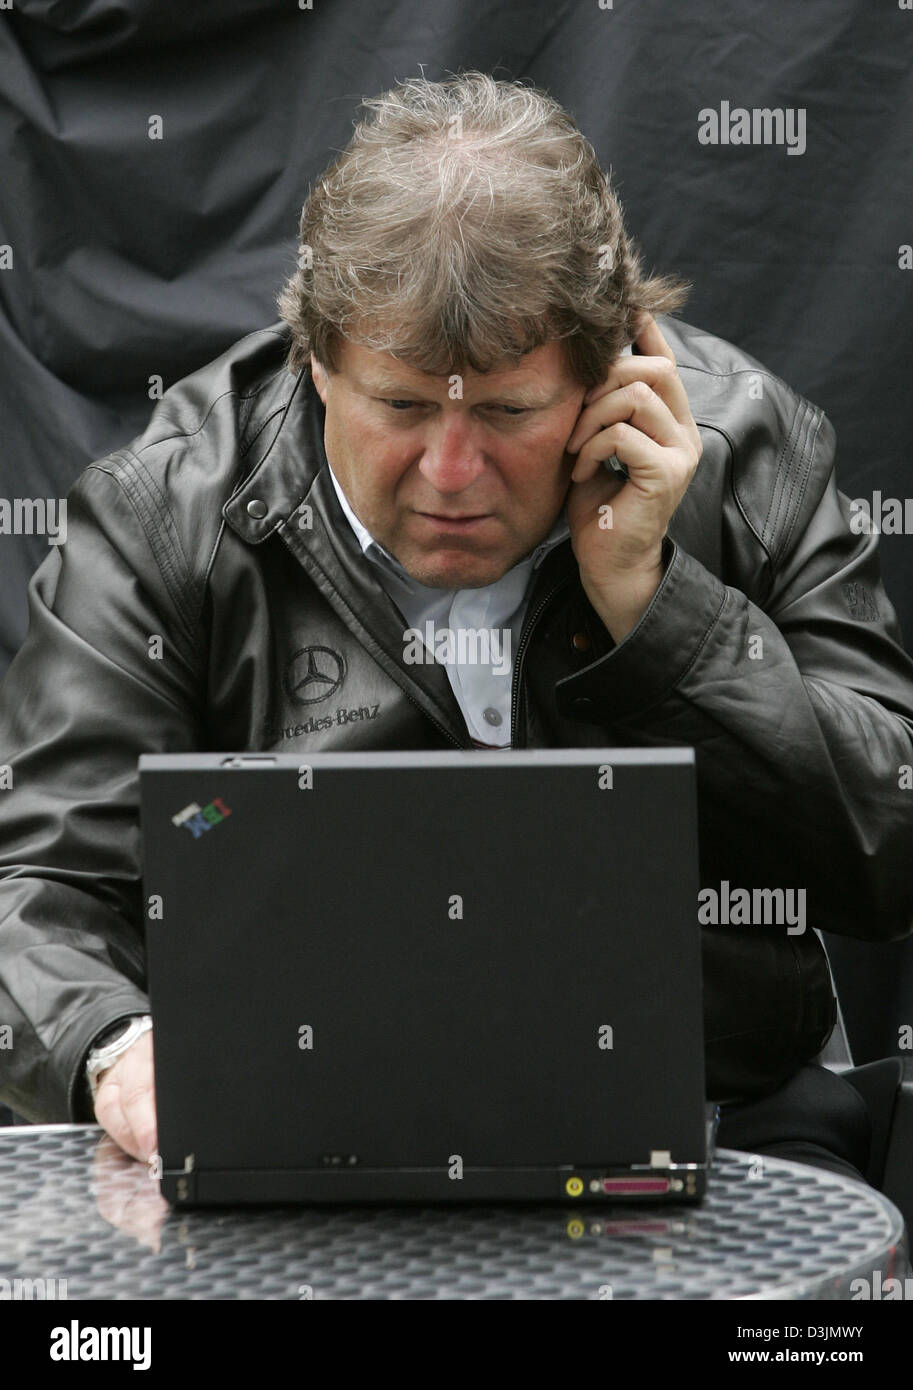 (dpa) - German Norbert Haug, Mercedes Motorsport Director, looks at his computer at the Grand Prix circuit in Albert Park in Melbourne, Australia, 4 March 2005. The first Grand Prix of the 2005 season will start on 6 March 2005. Stock Photo